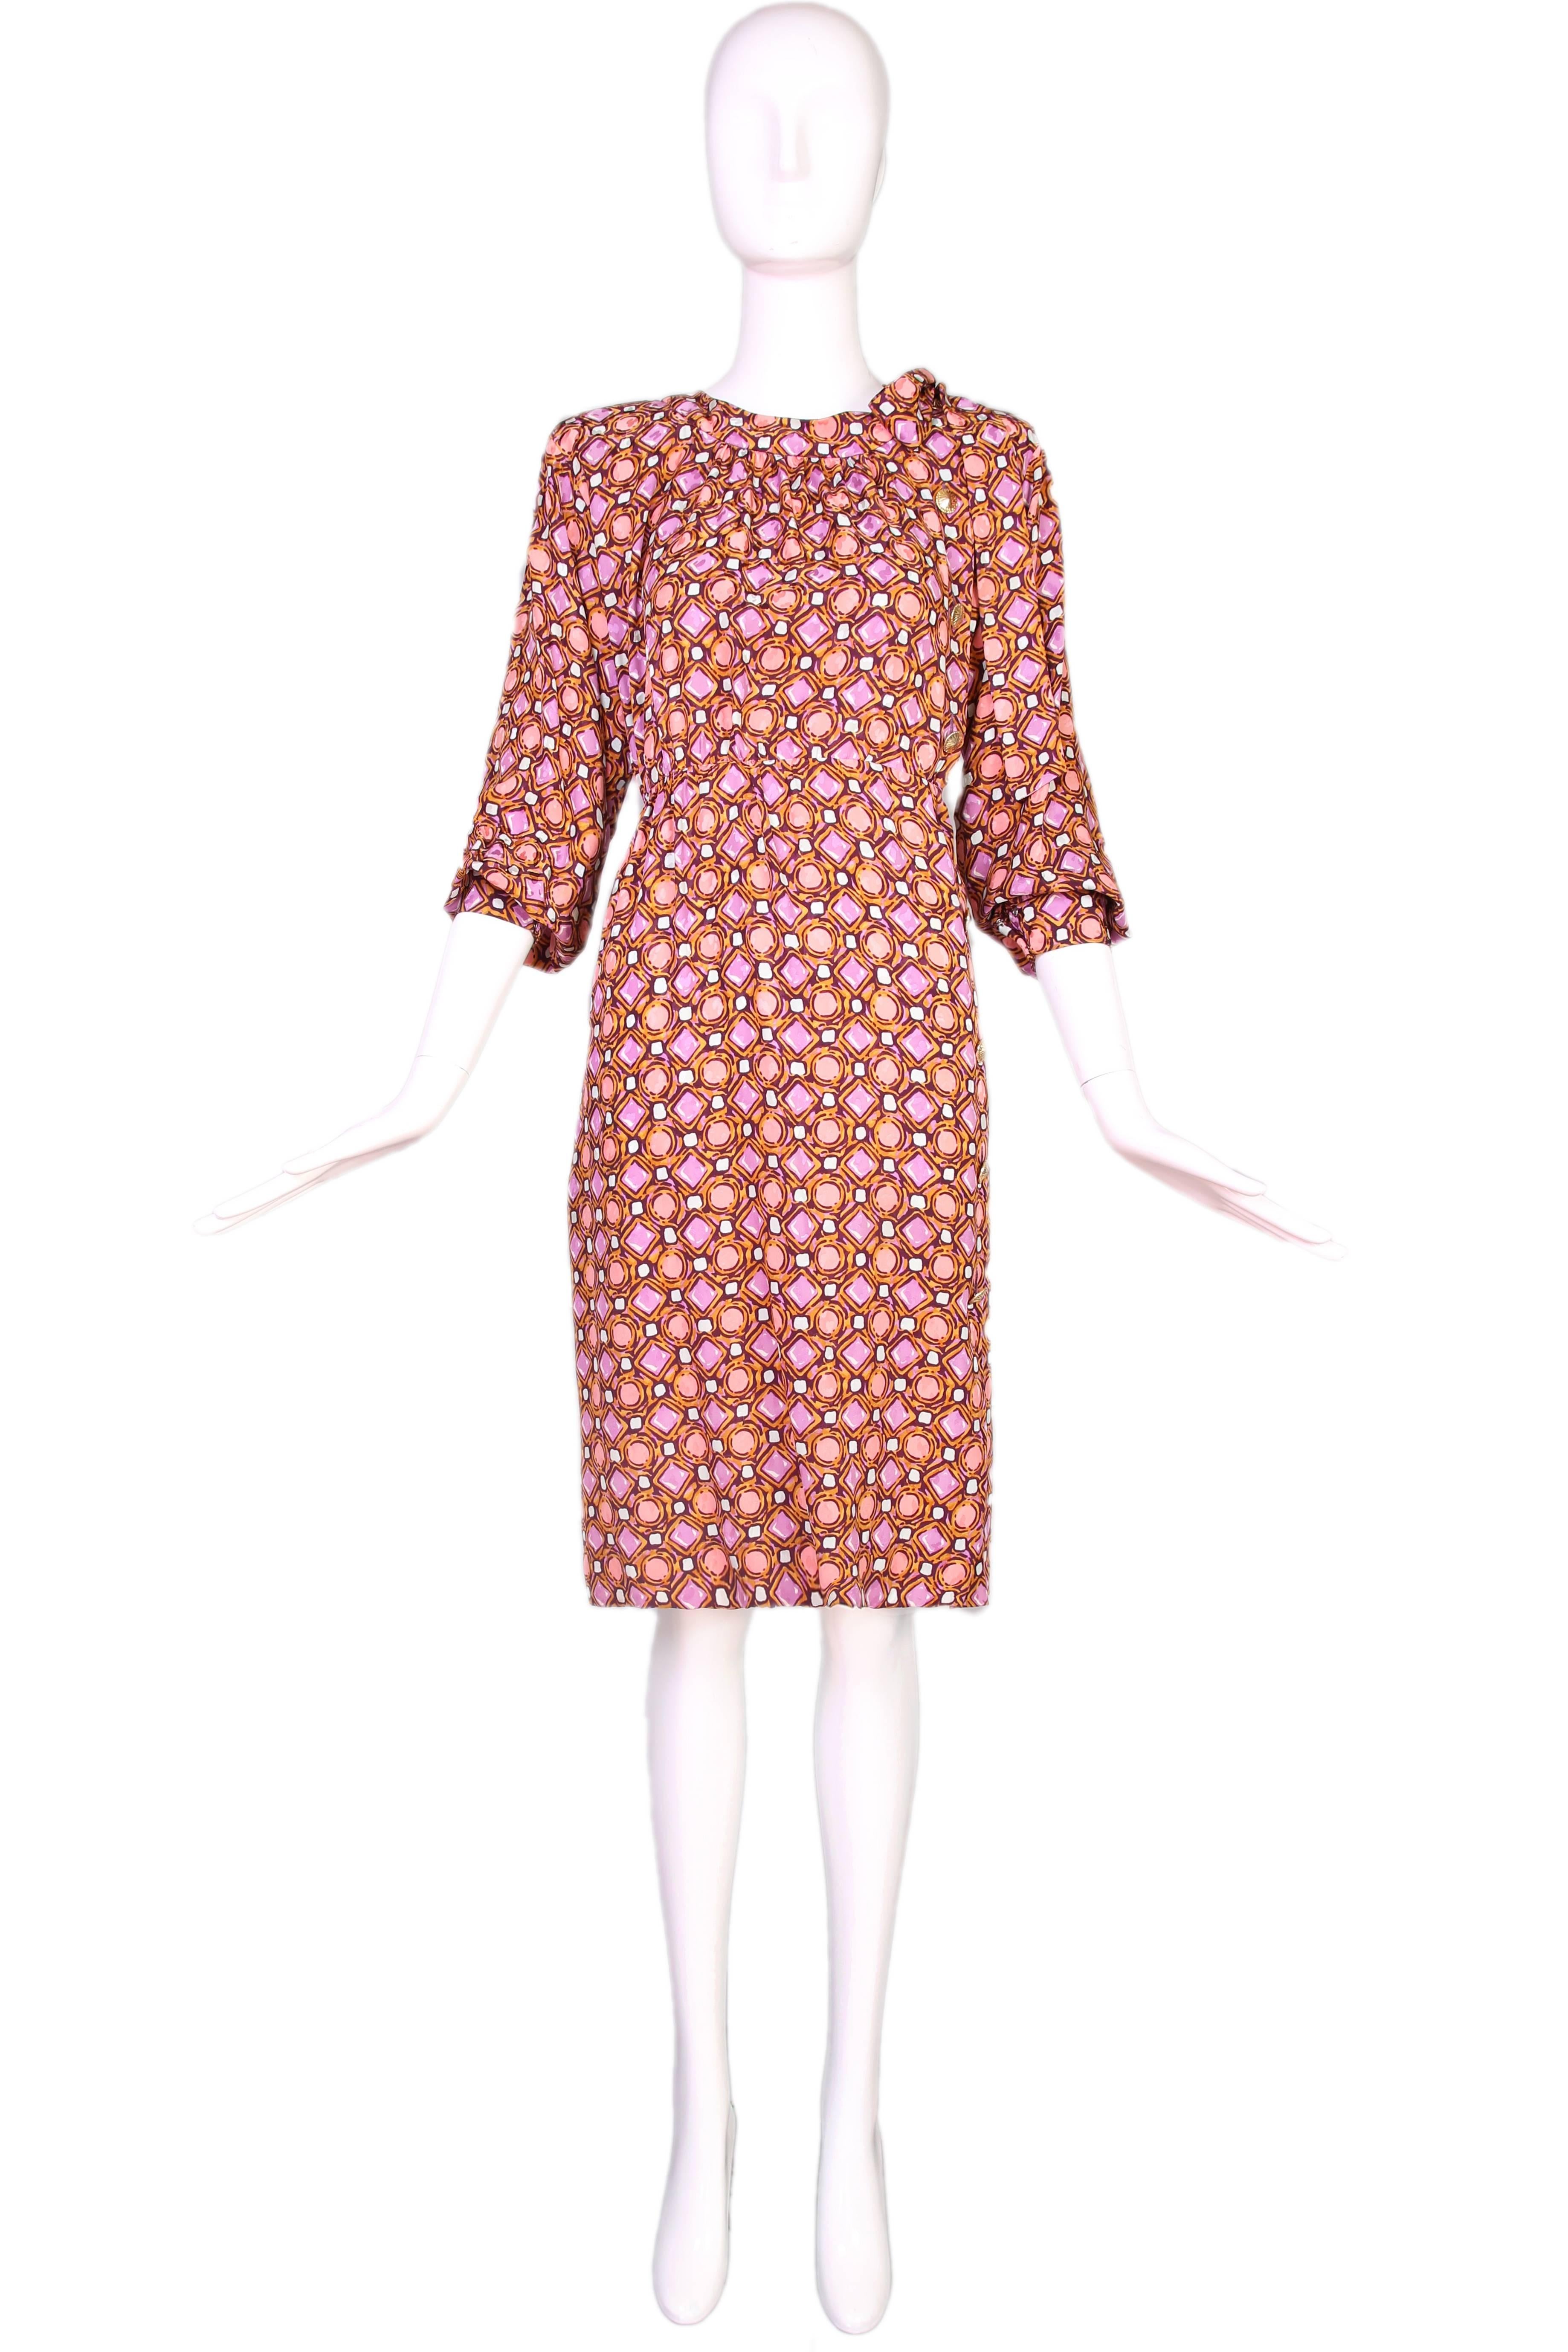 1984 Yves Saint Laurent silk day dress in orange, purple, and grey geometric print with long side neck ties and gold tone etched button closures down center left side. See original archival runway photographs in listing. In excellent condition. Size